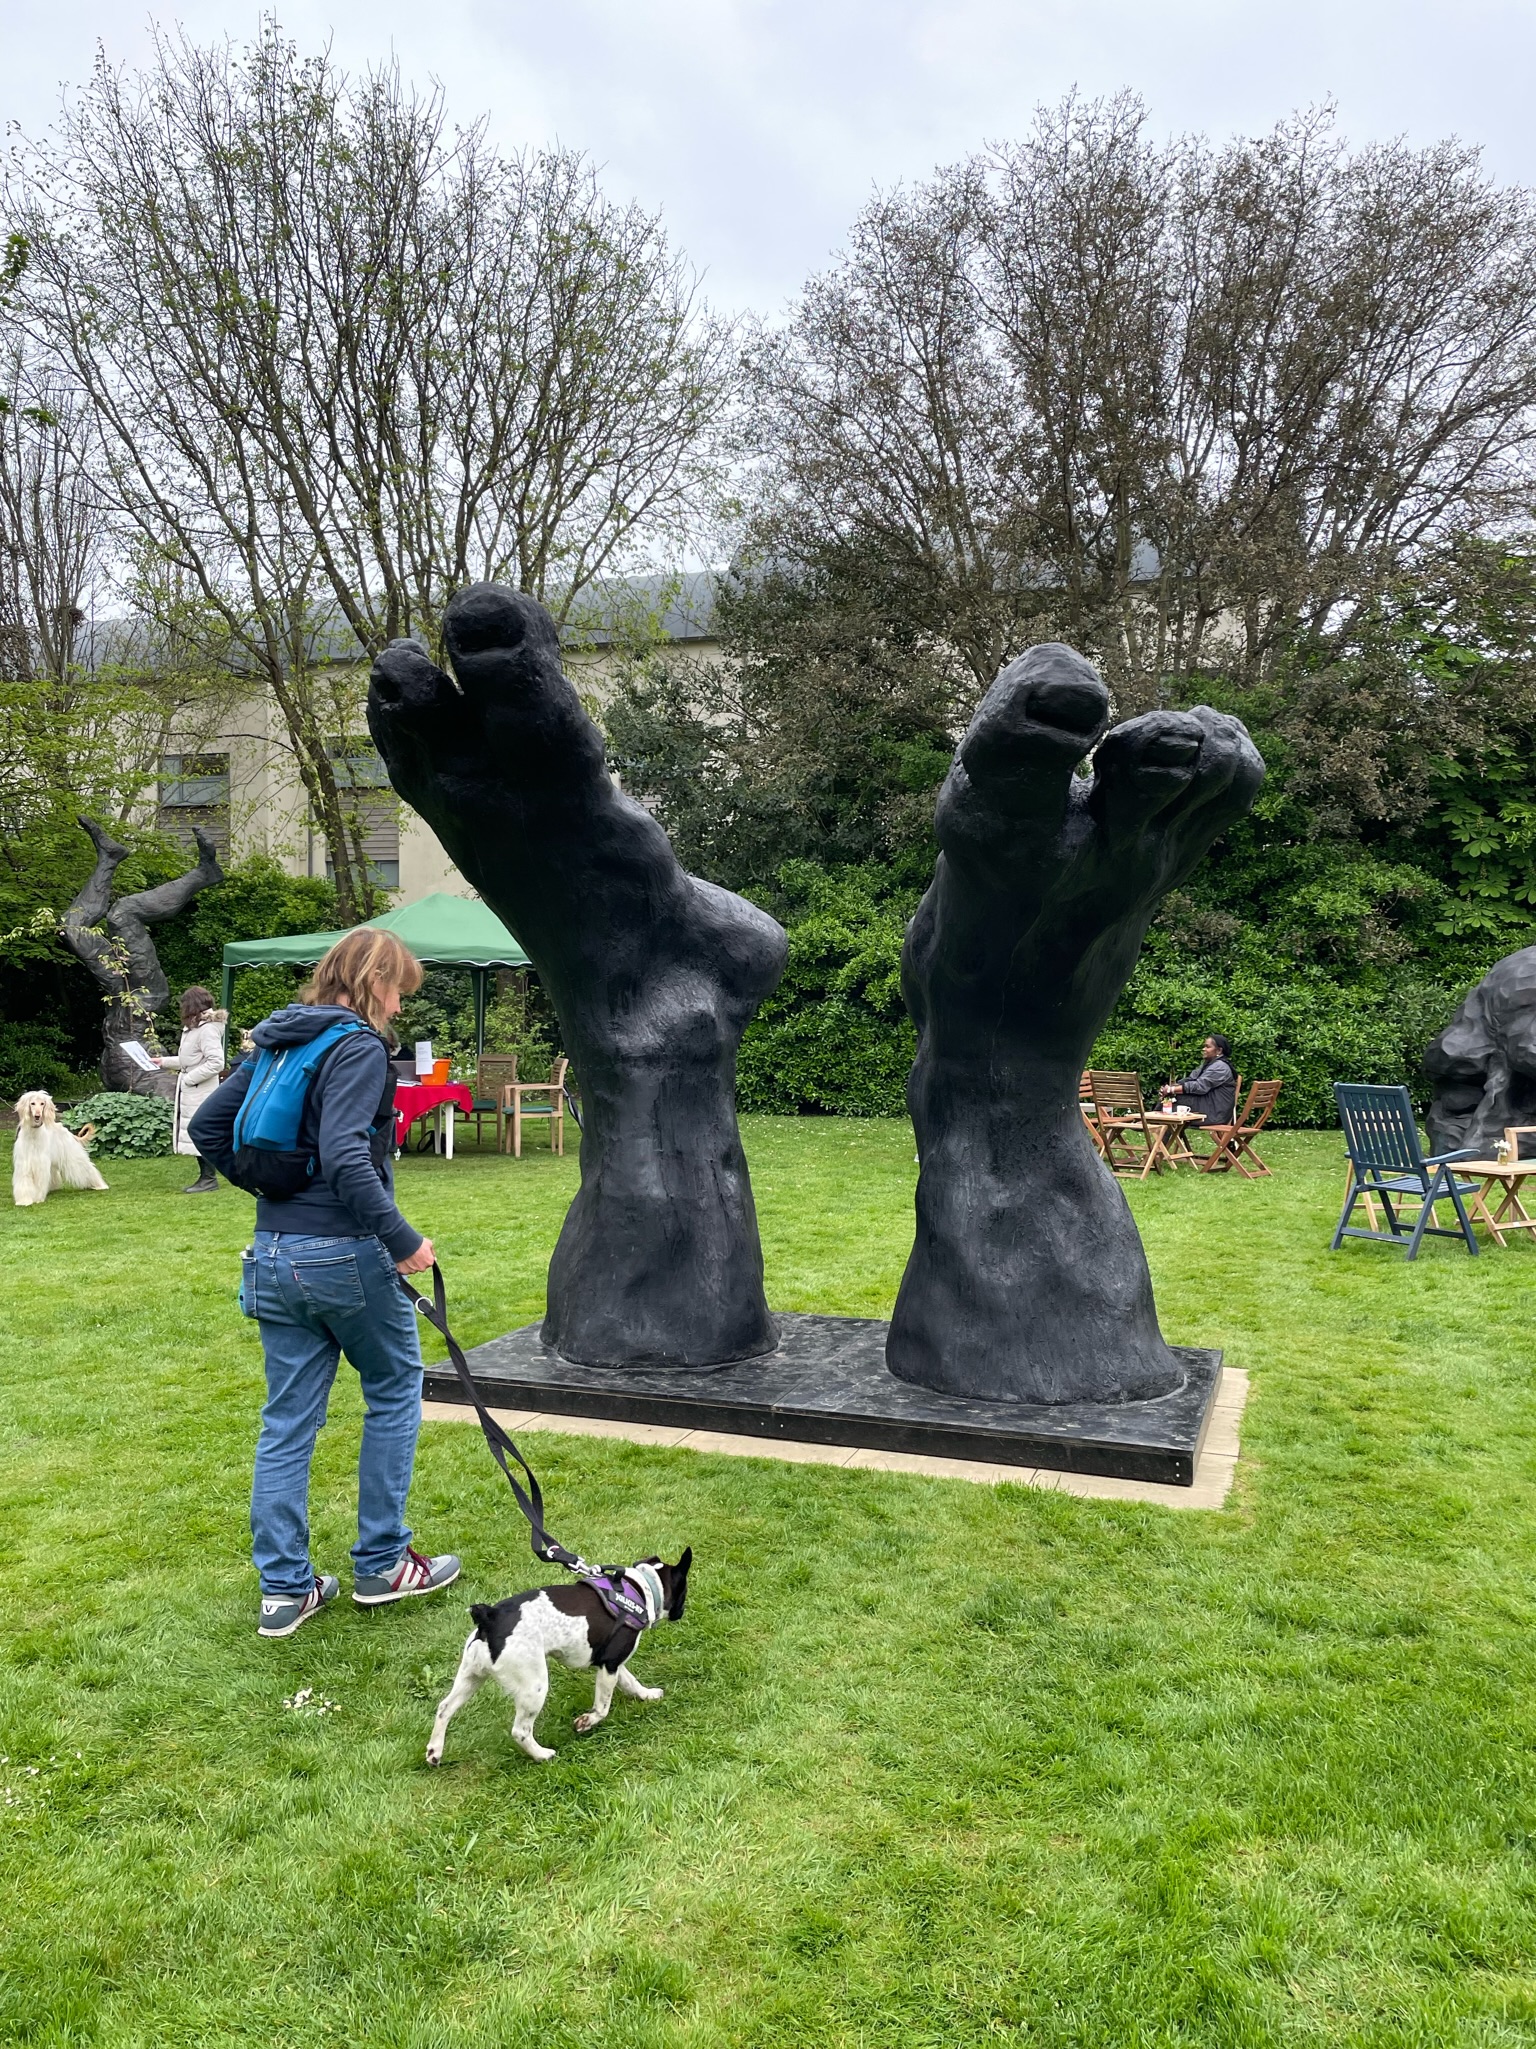 These sculptures seem big. Or my humans are small 🤷🏻‍♀️